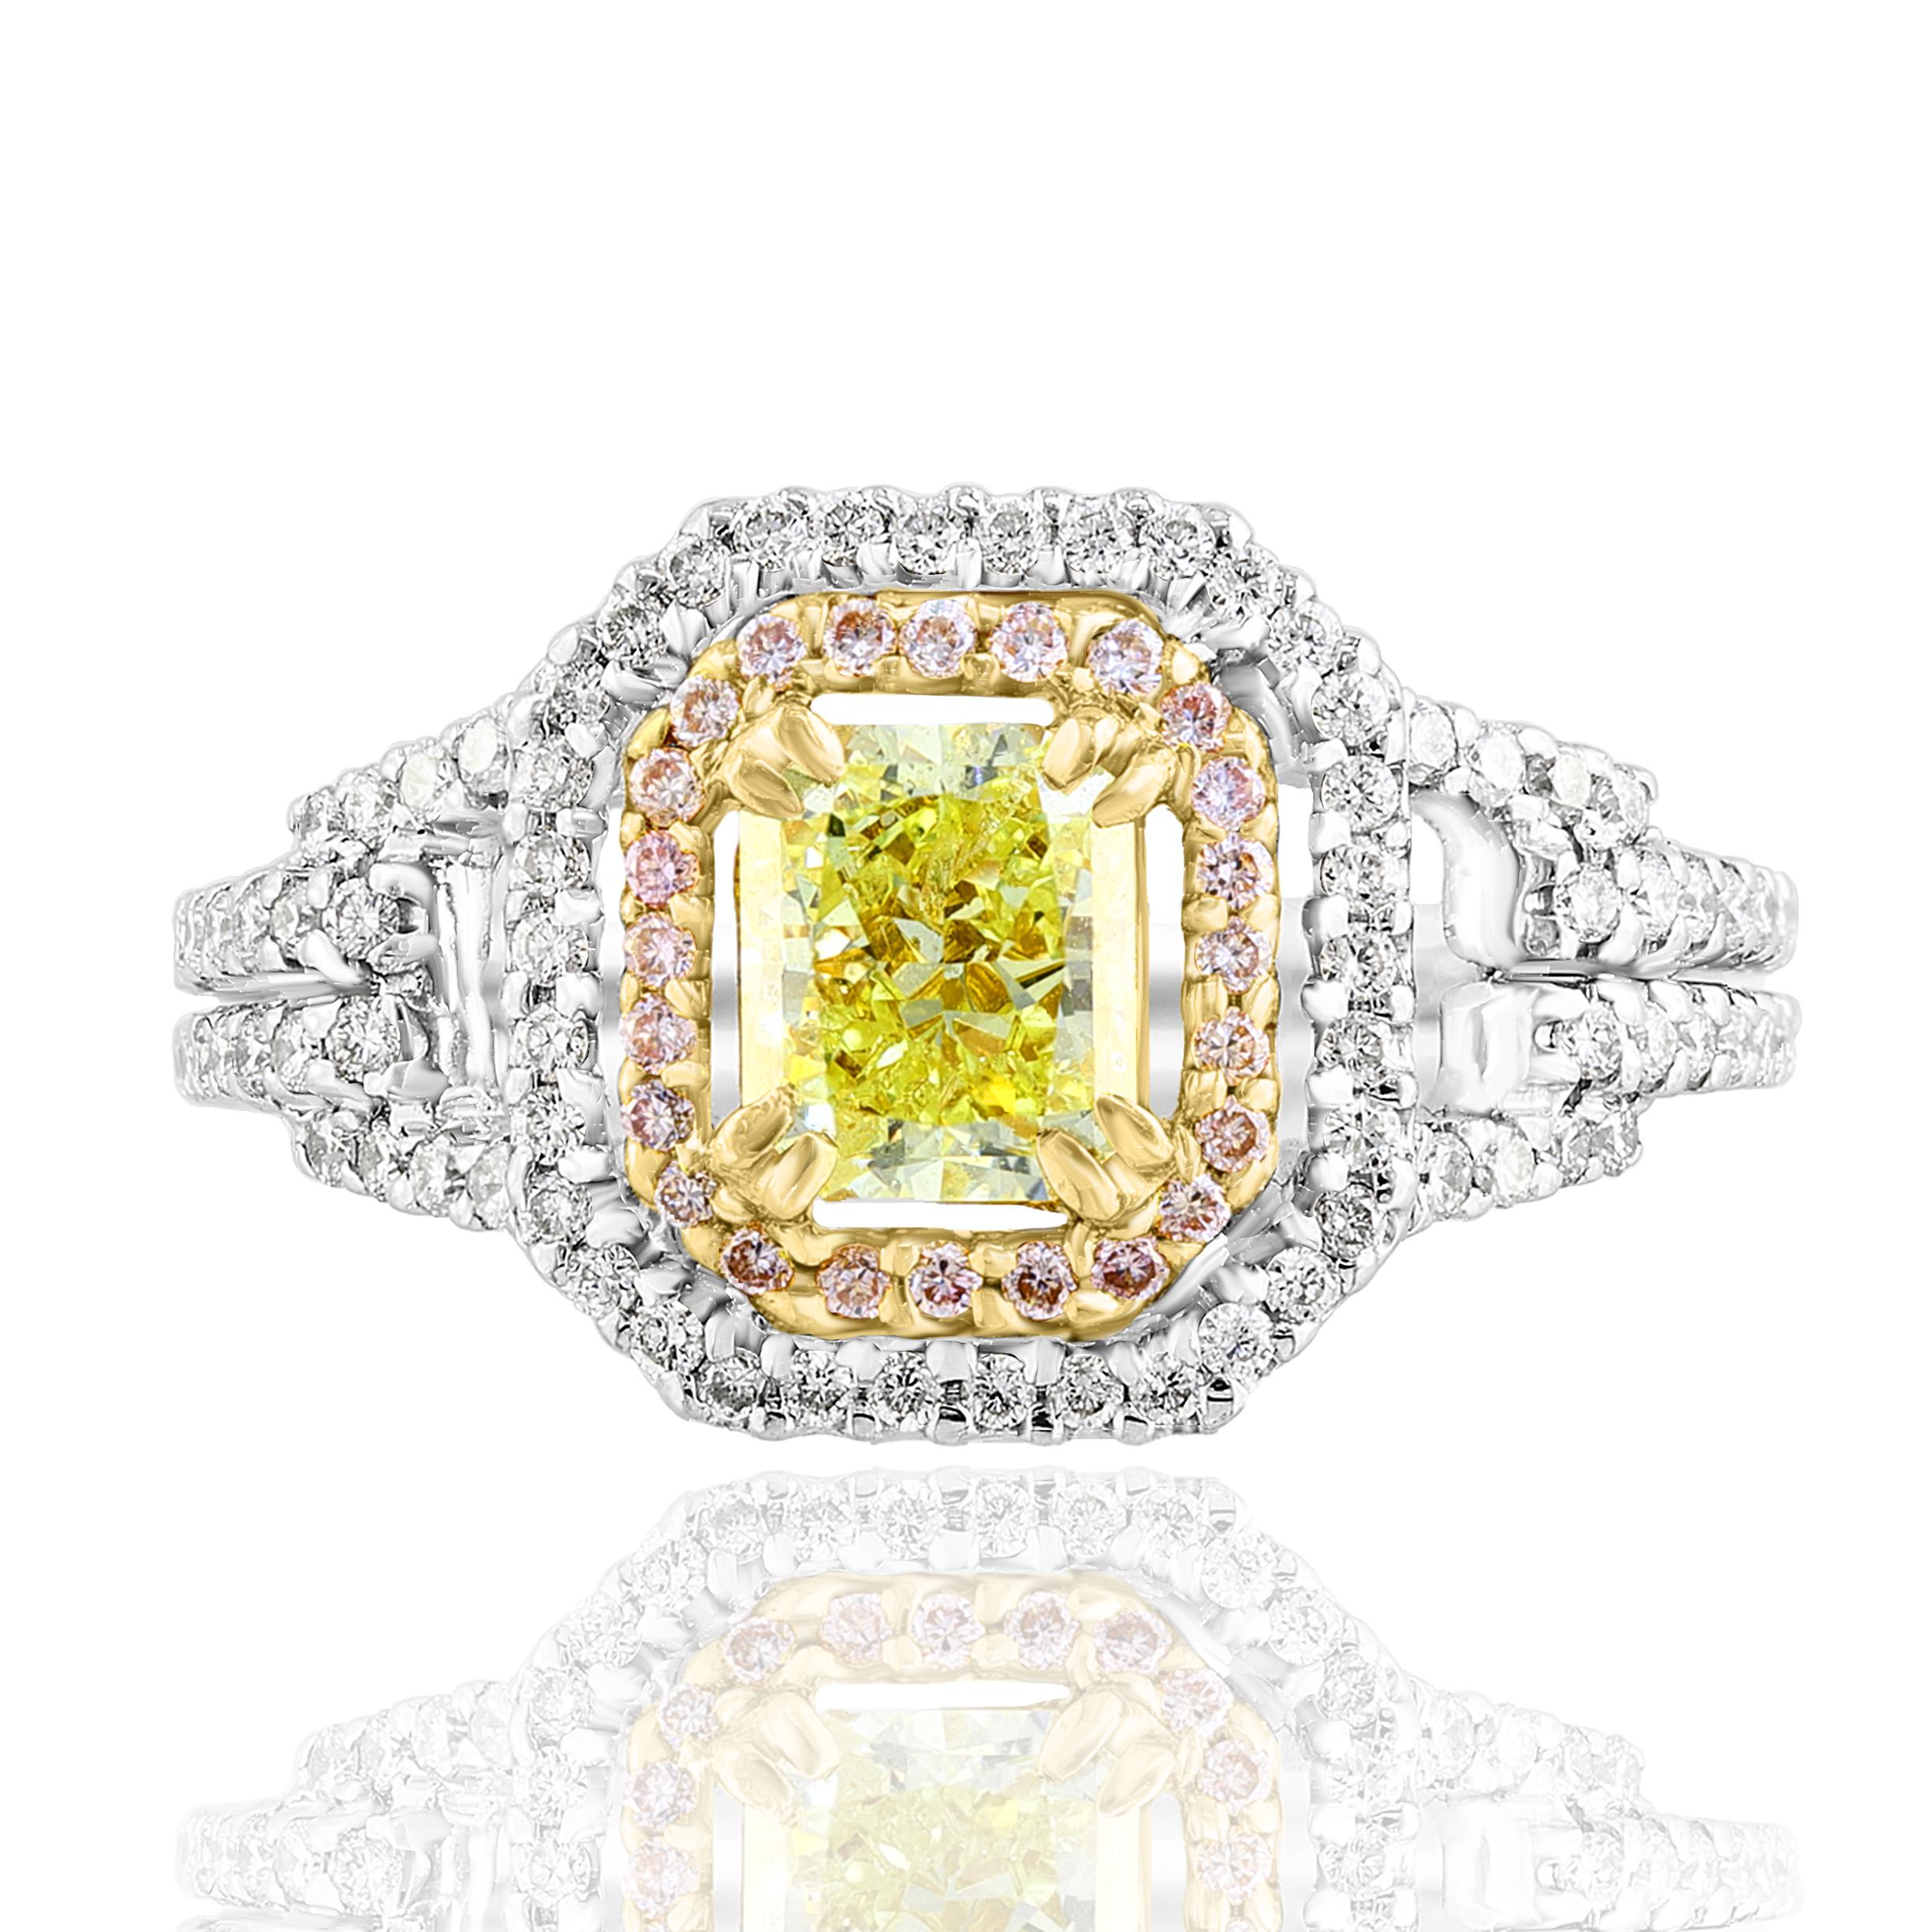 A stunning ring showcasing a fancy emerald cut yellow diamond weighing 1.00 carat surrounded by a row of pink diamonds and white diamonds halfway to the shank. Flanking the center stone are the diamonds weighing 0.92 carats in total. Made in 18K mix